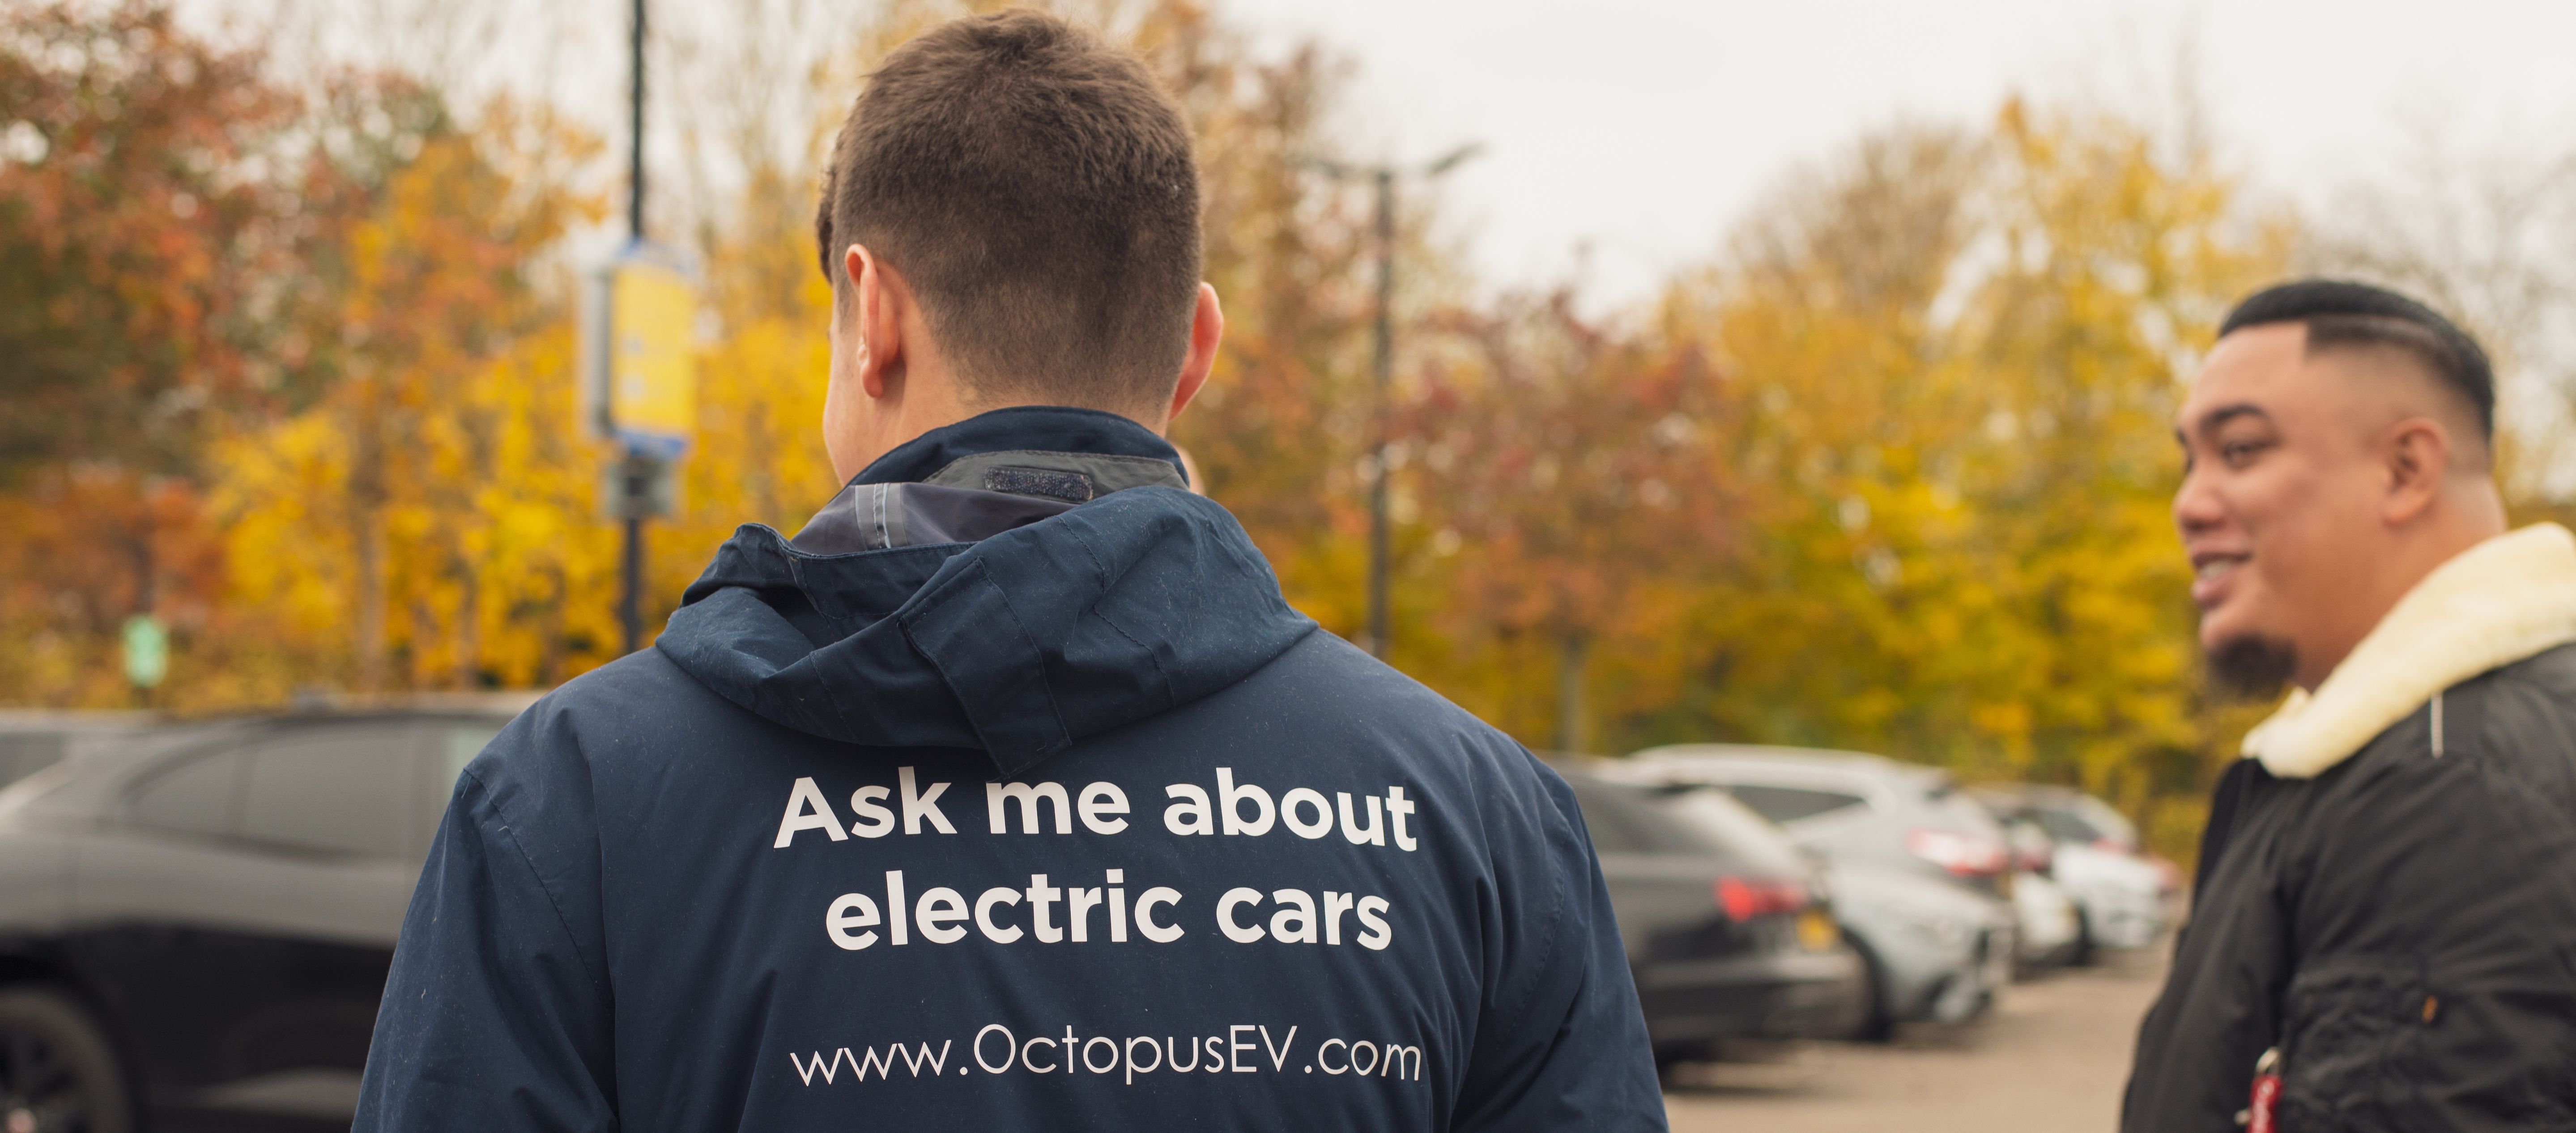 Octopus electric vehicles specialist talking to a customer with cars in the background